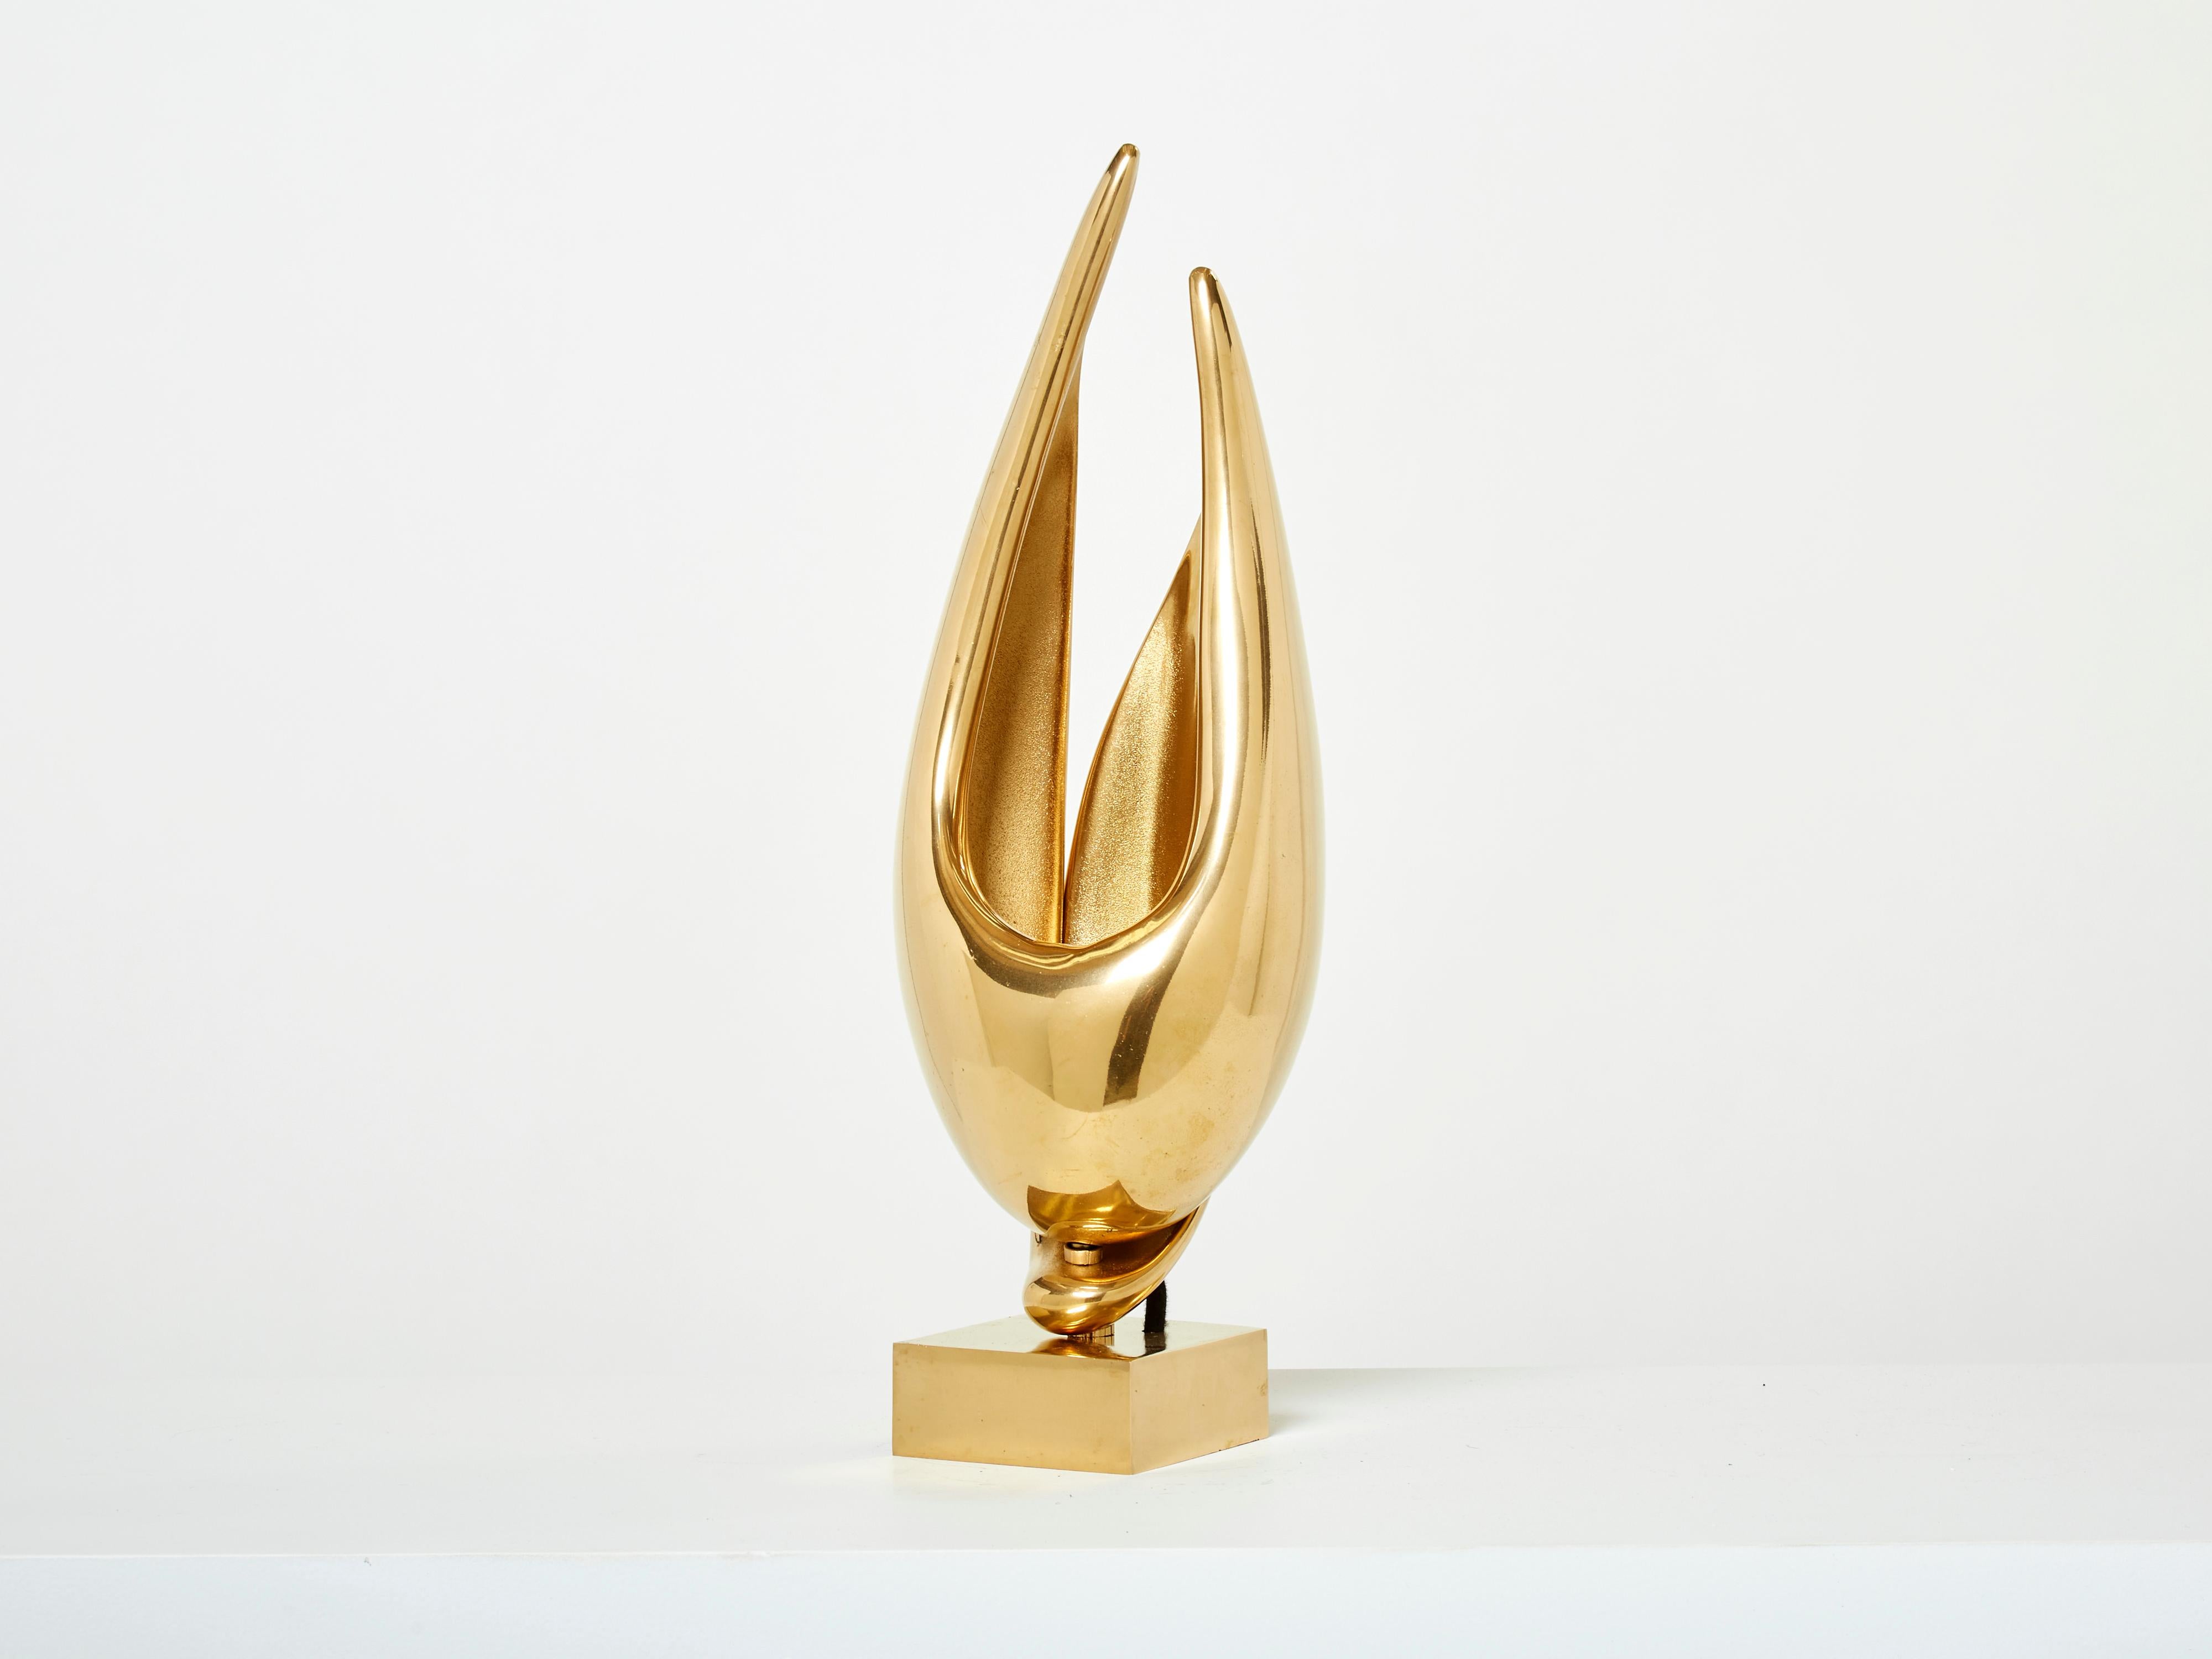 This beautiful table lamp produced by Atelier Michel Armand in the 1970s has the visual impact of a modernist sculpture. This rare model, named L’Envol, is made of solid bronze fully gilded, and shaped as a small flame. The result is the impression